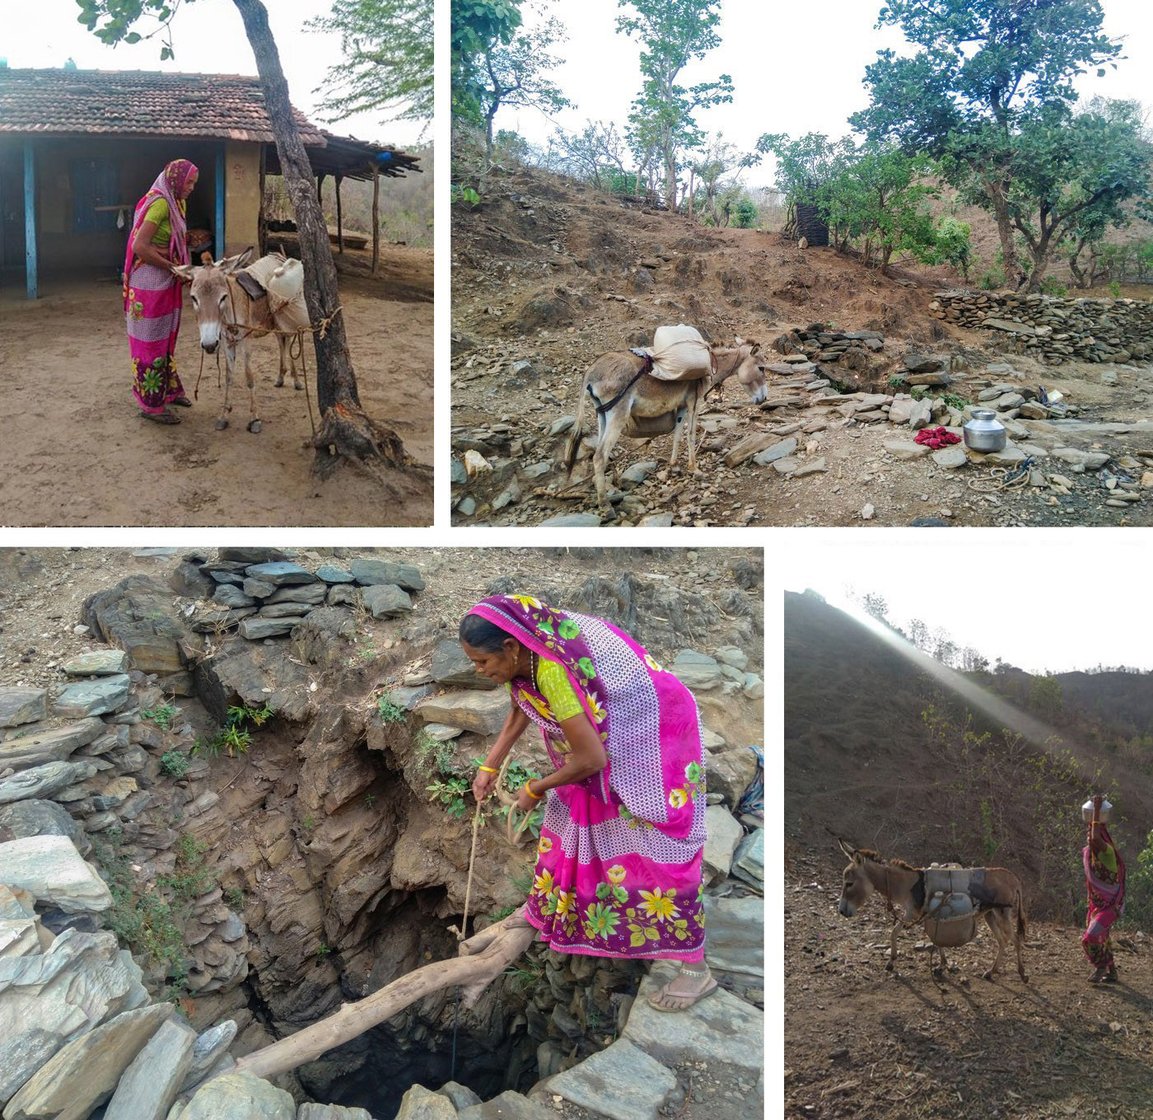 Dali Bada, who makes multiple trips downhill and uphill over several hours every morning with her donkey, to fill water from a stream or pits dug by villagers, says: "... at times I feel that there's no god; if there was one, why would women like me die filling pots with water?'